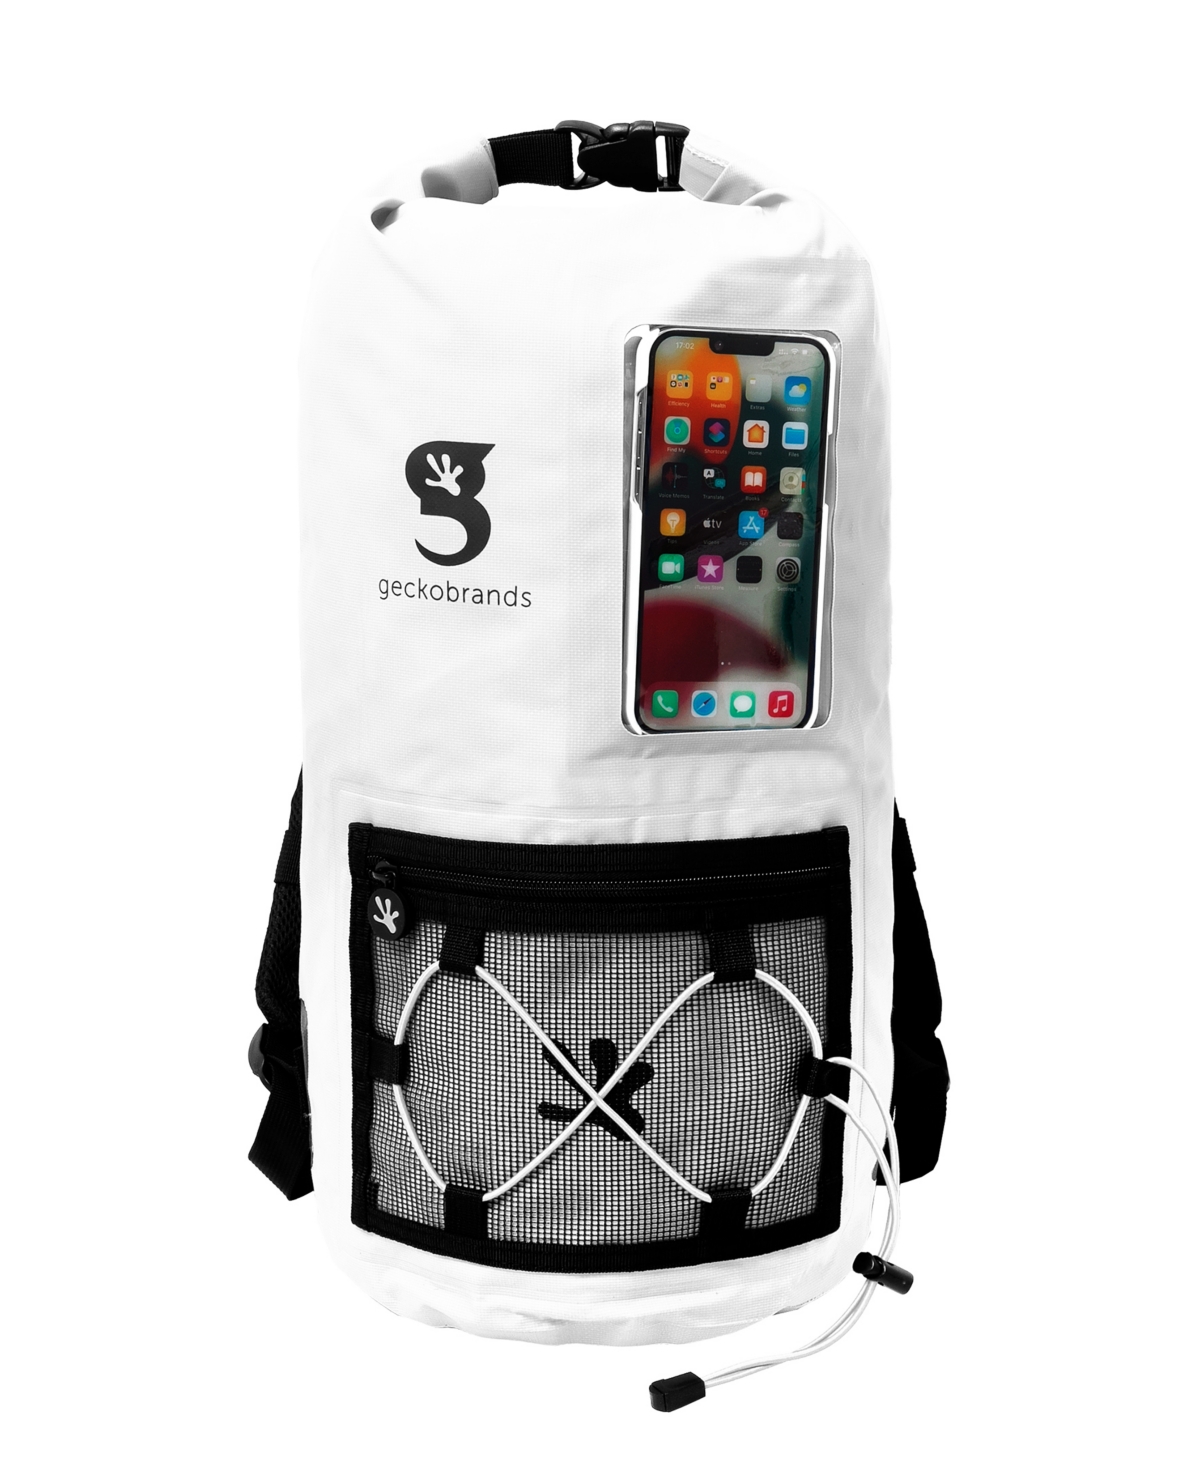 Geckobrands Hydroner 20 Liters Water-resistant Backpack In White